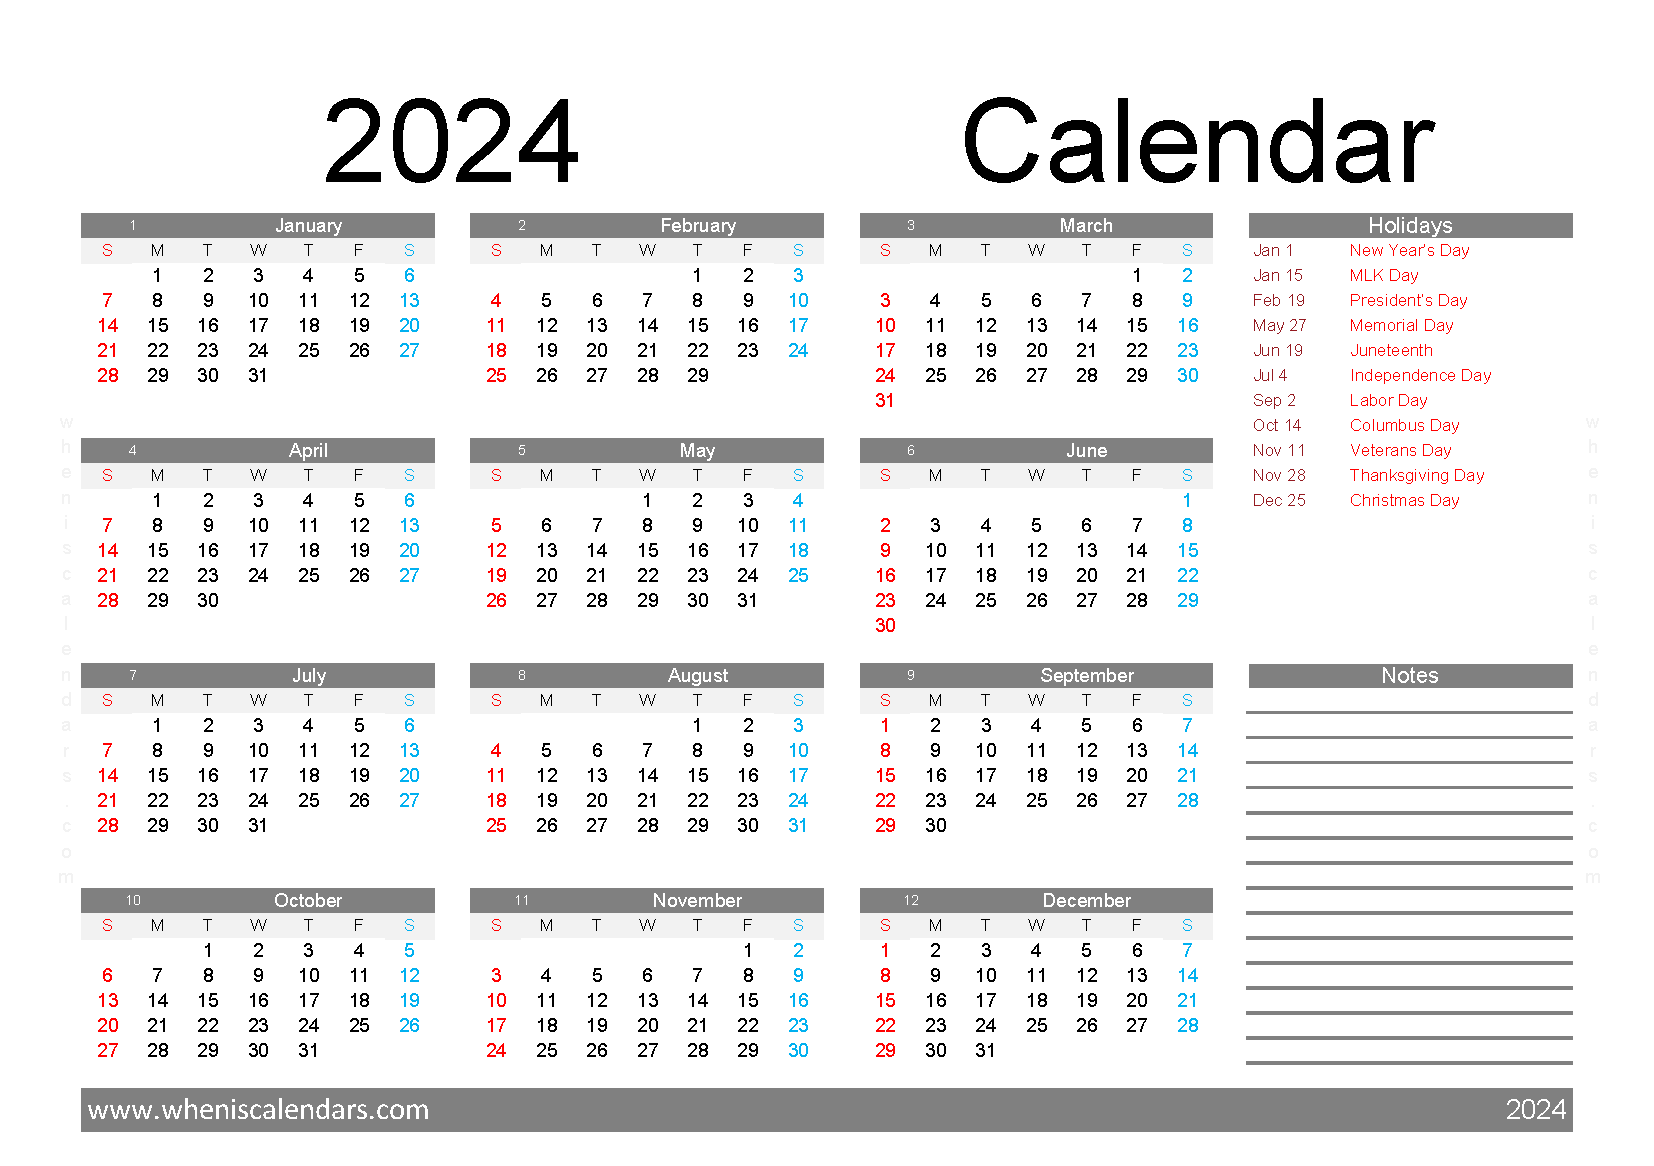 Download free 2024 Calendar with Holidays printable A5 in horizontal landscape